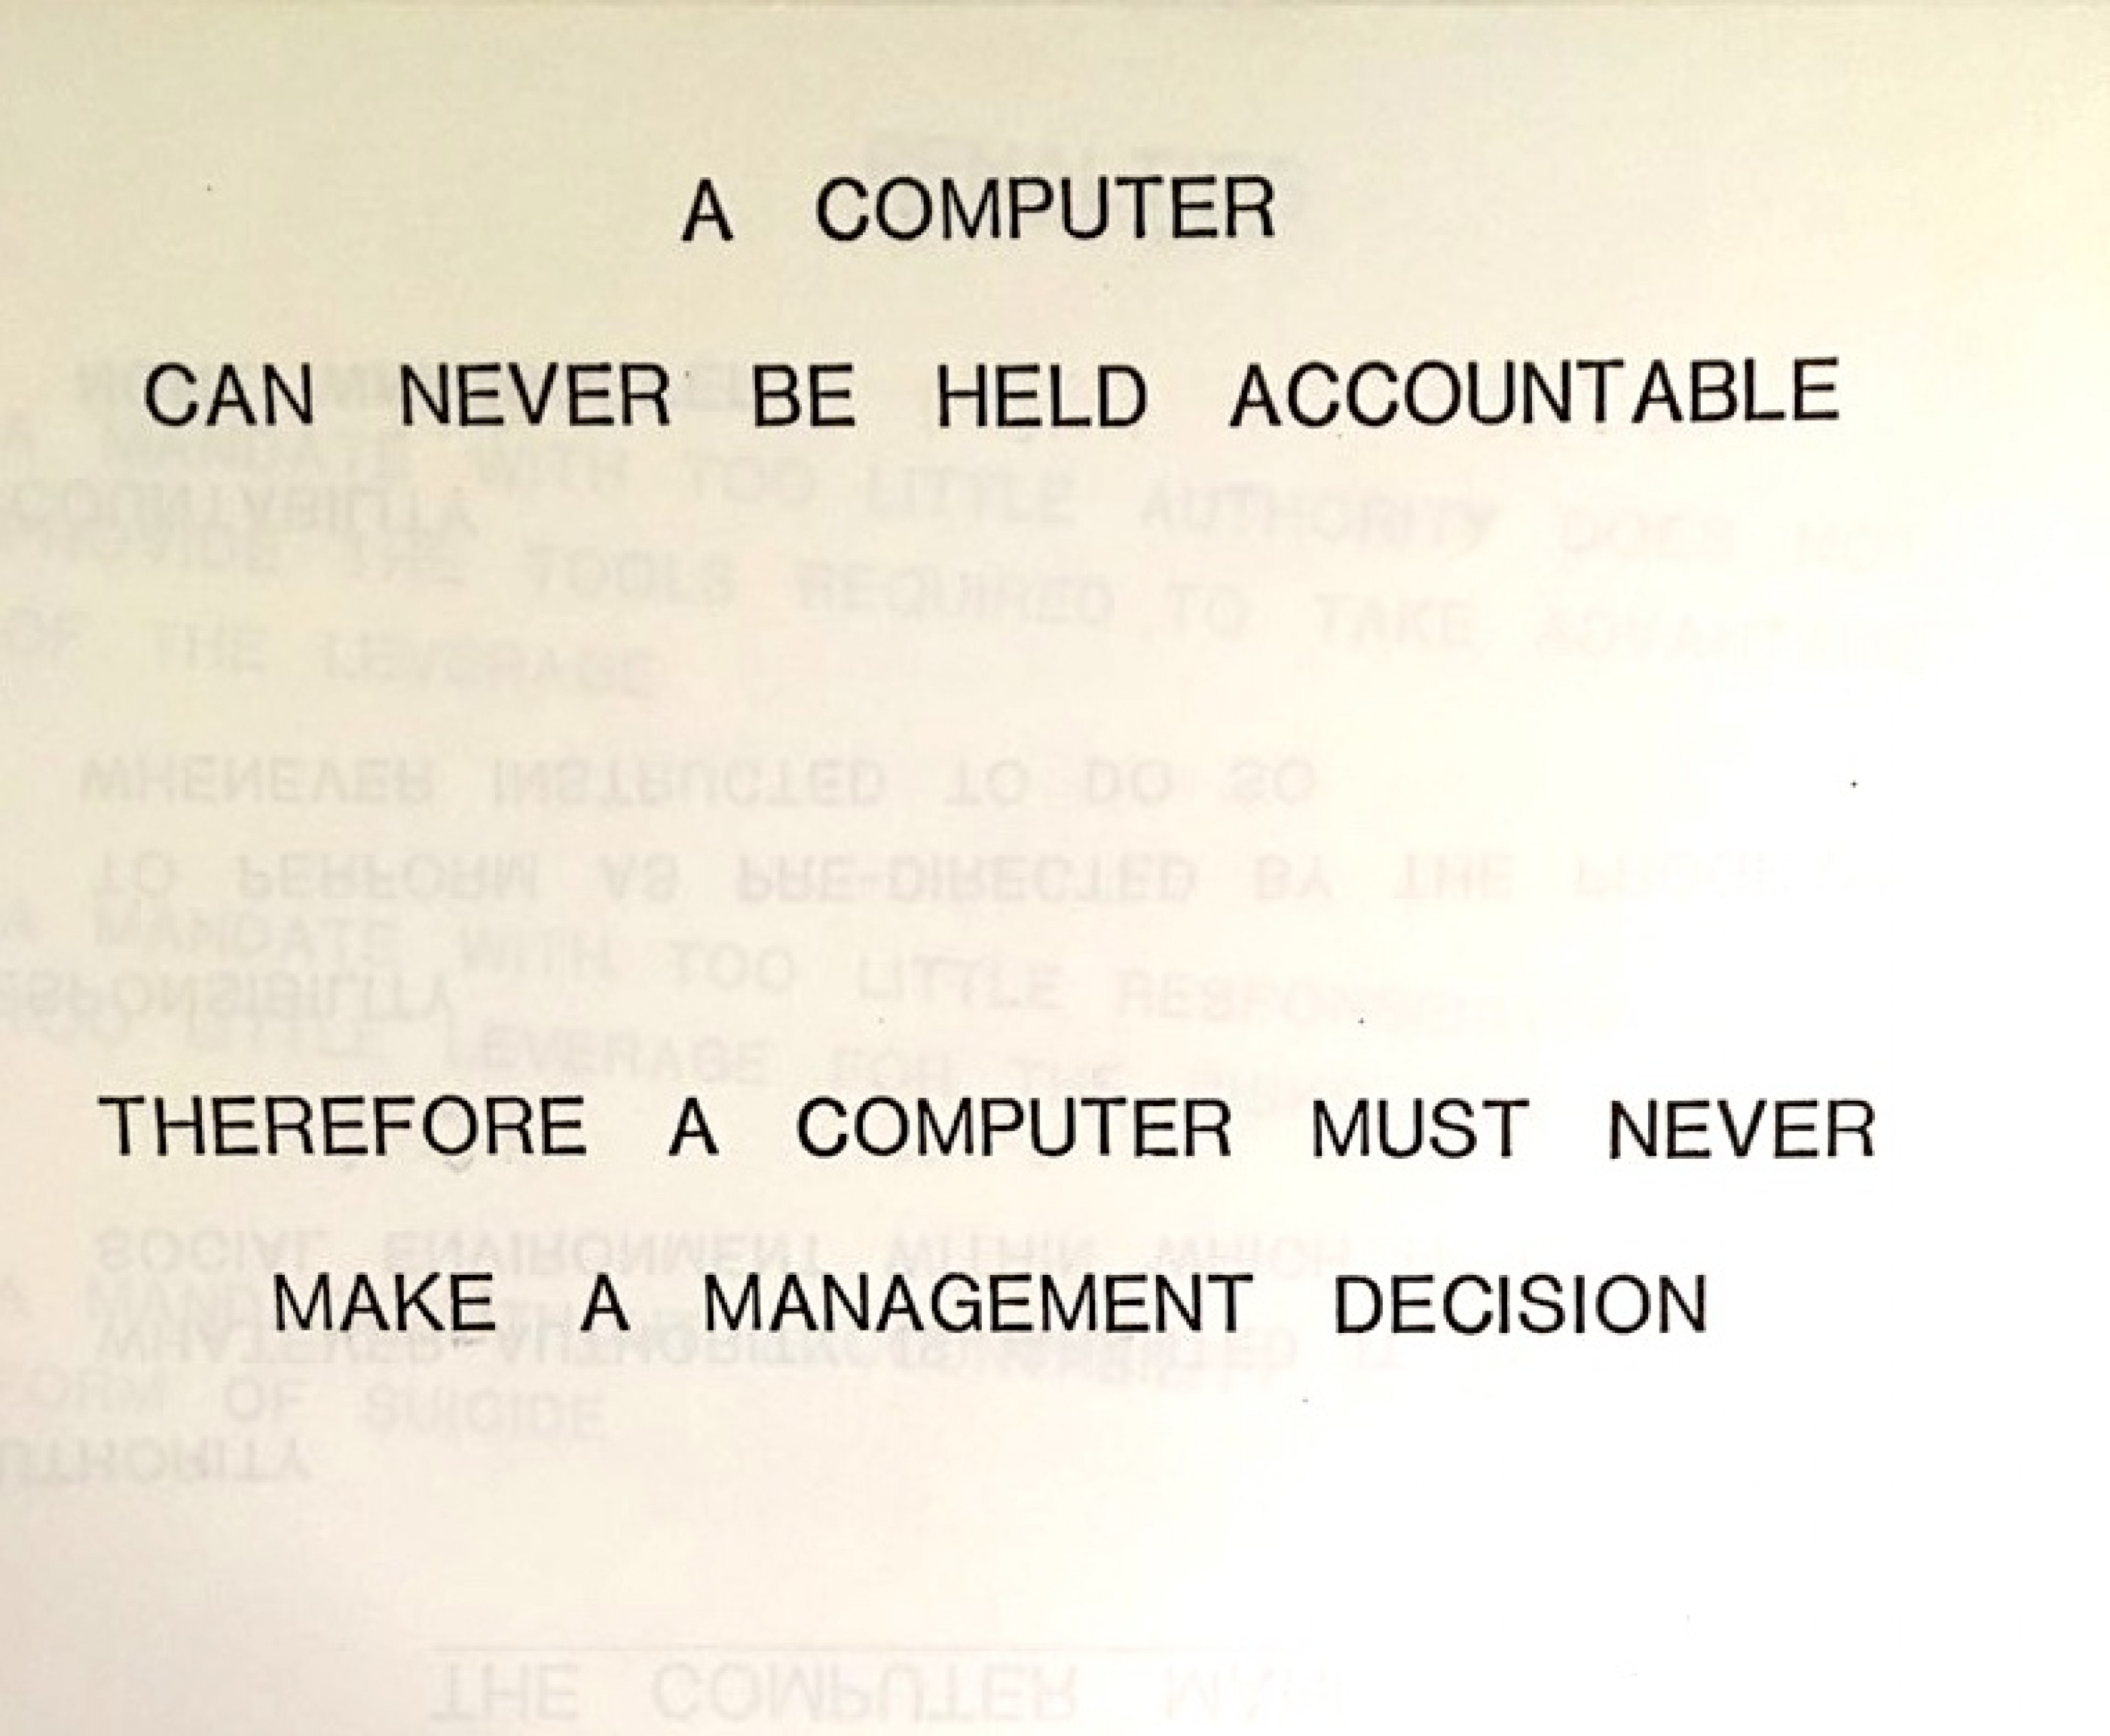 Fig.2: Internal IBM Document from a 1979’s presentation. Source: https://twitter.com/bumblebike/status/832394003492564993?s=20